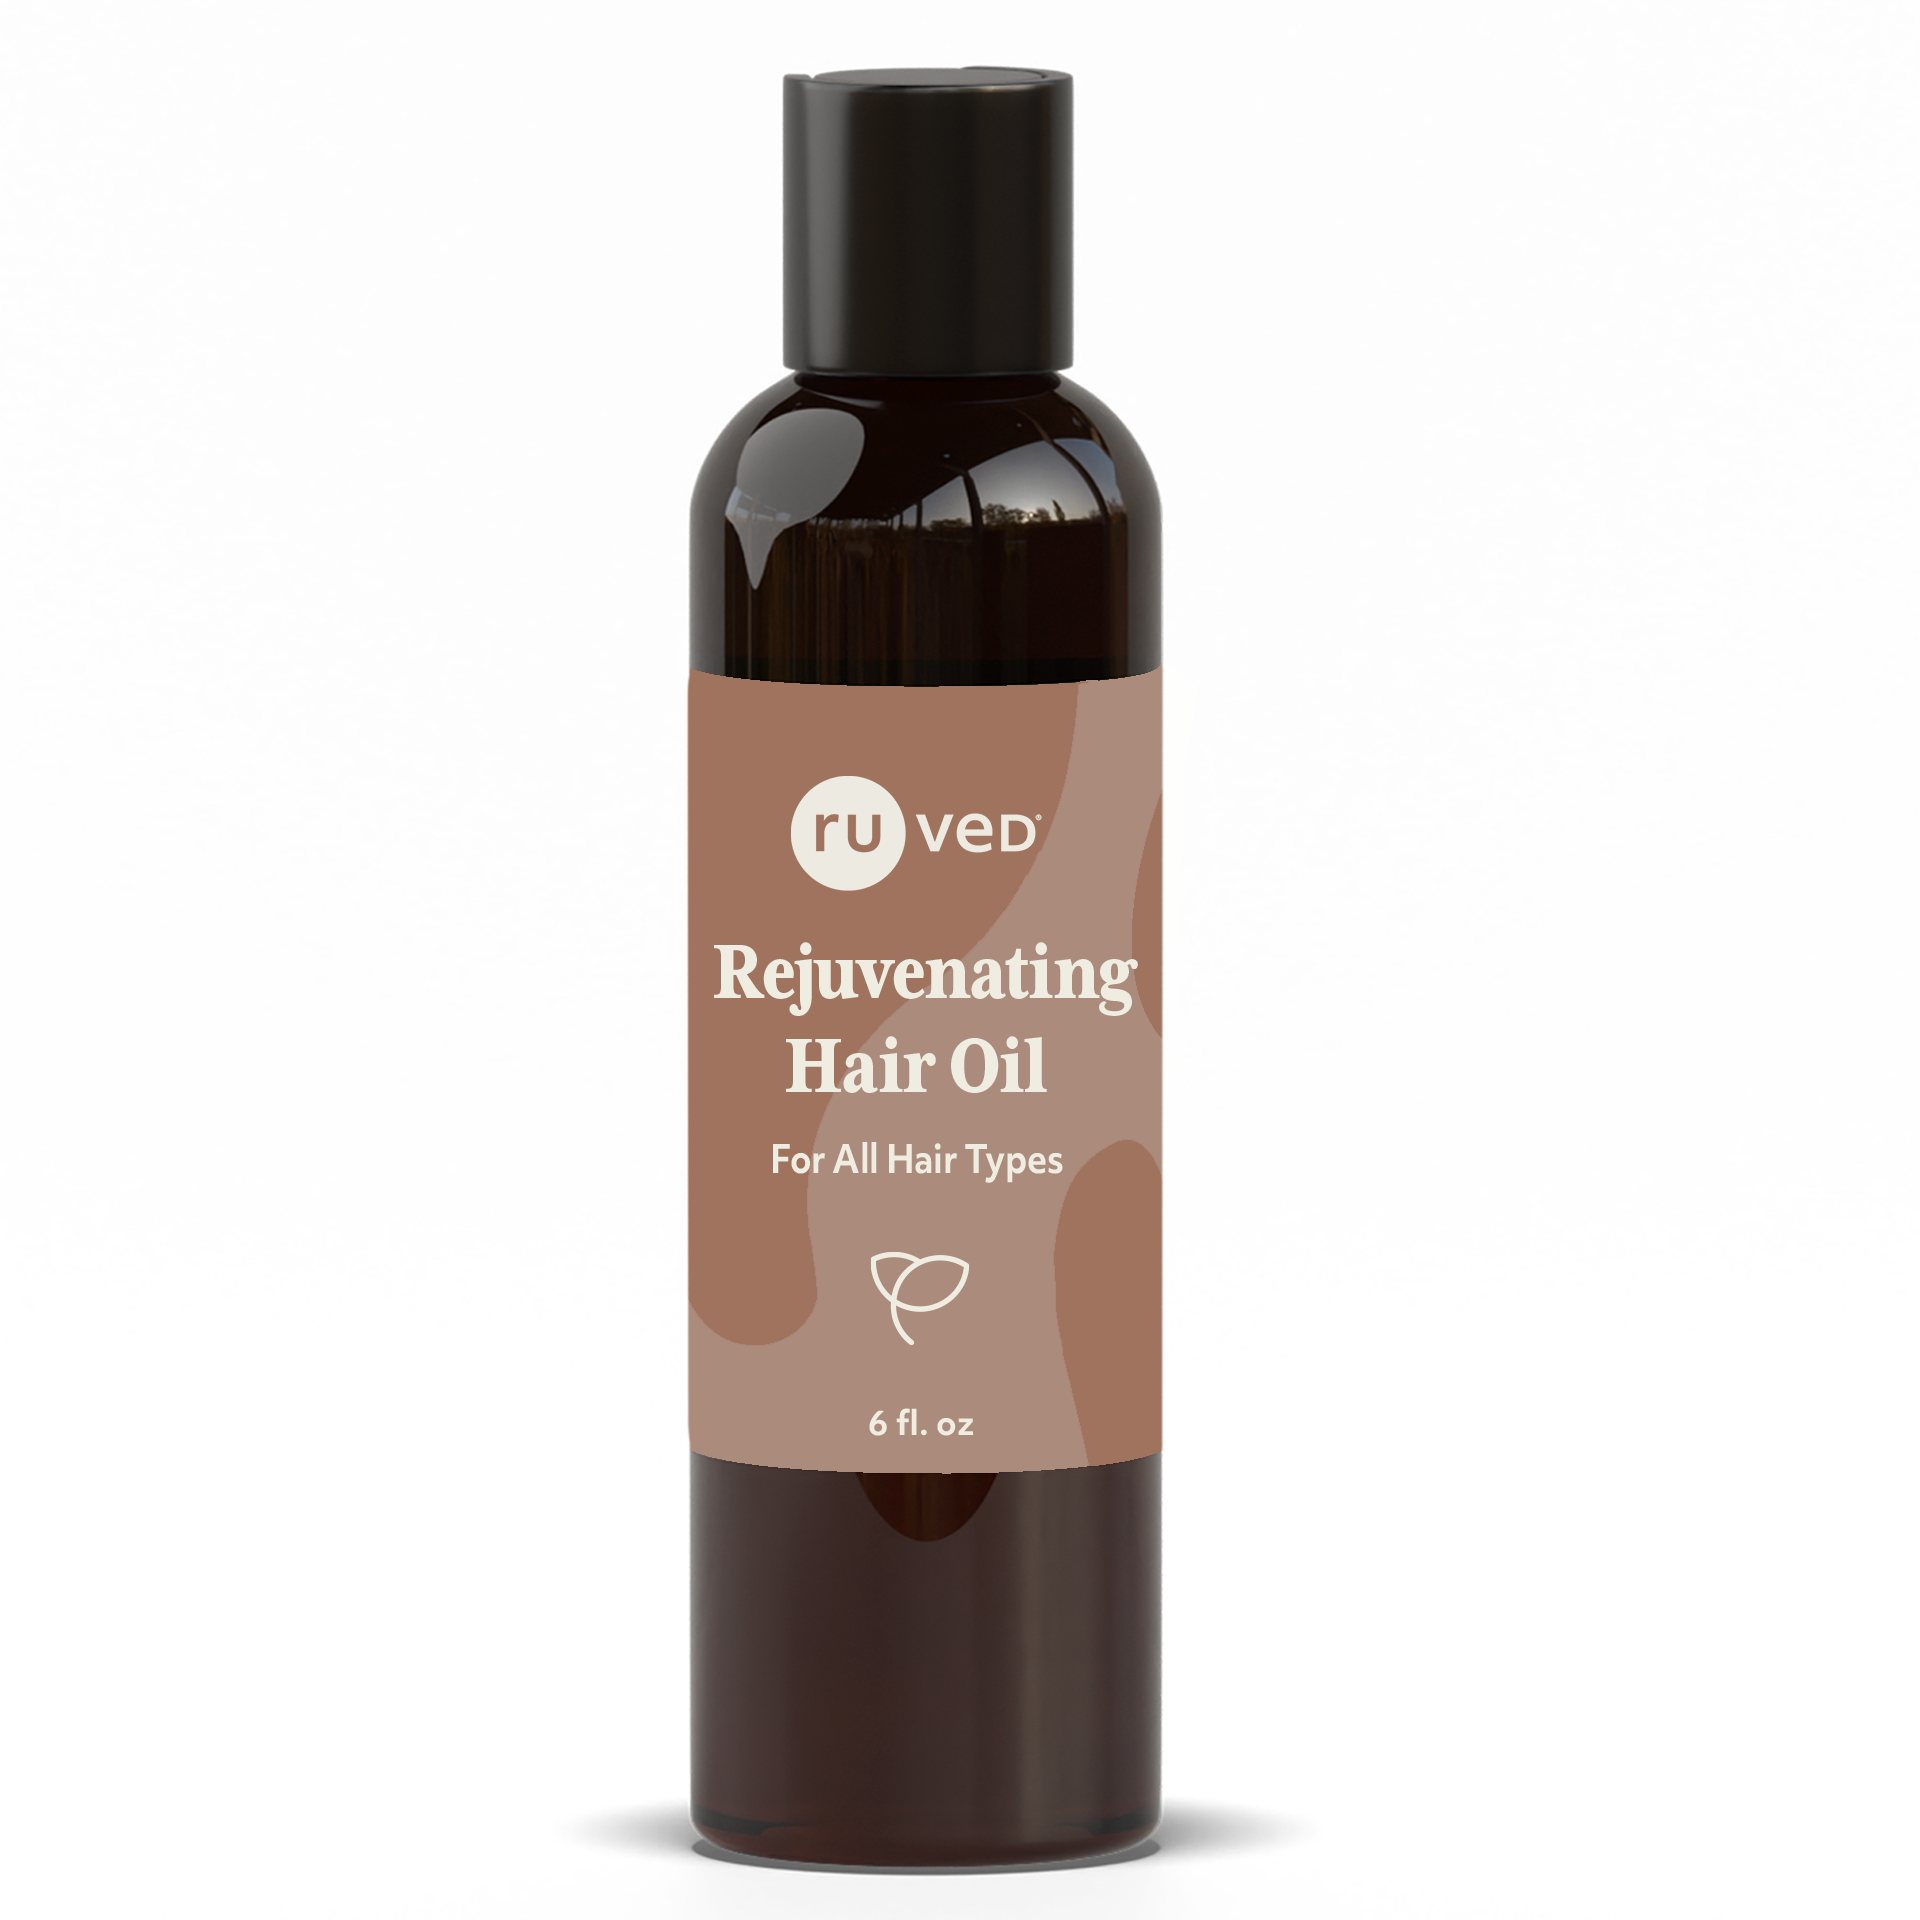 Rejuvenating Hair Oil bottle front Oil infused with herbs that promotes lustrous hair and healthy scalp by ruved herbal supplements and ayush herbs